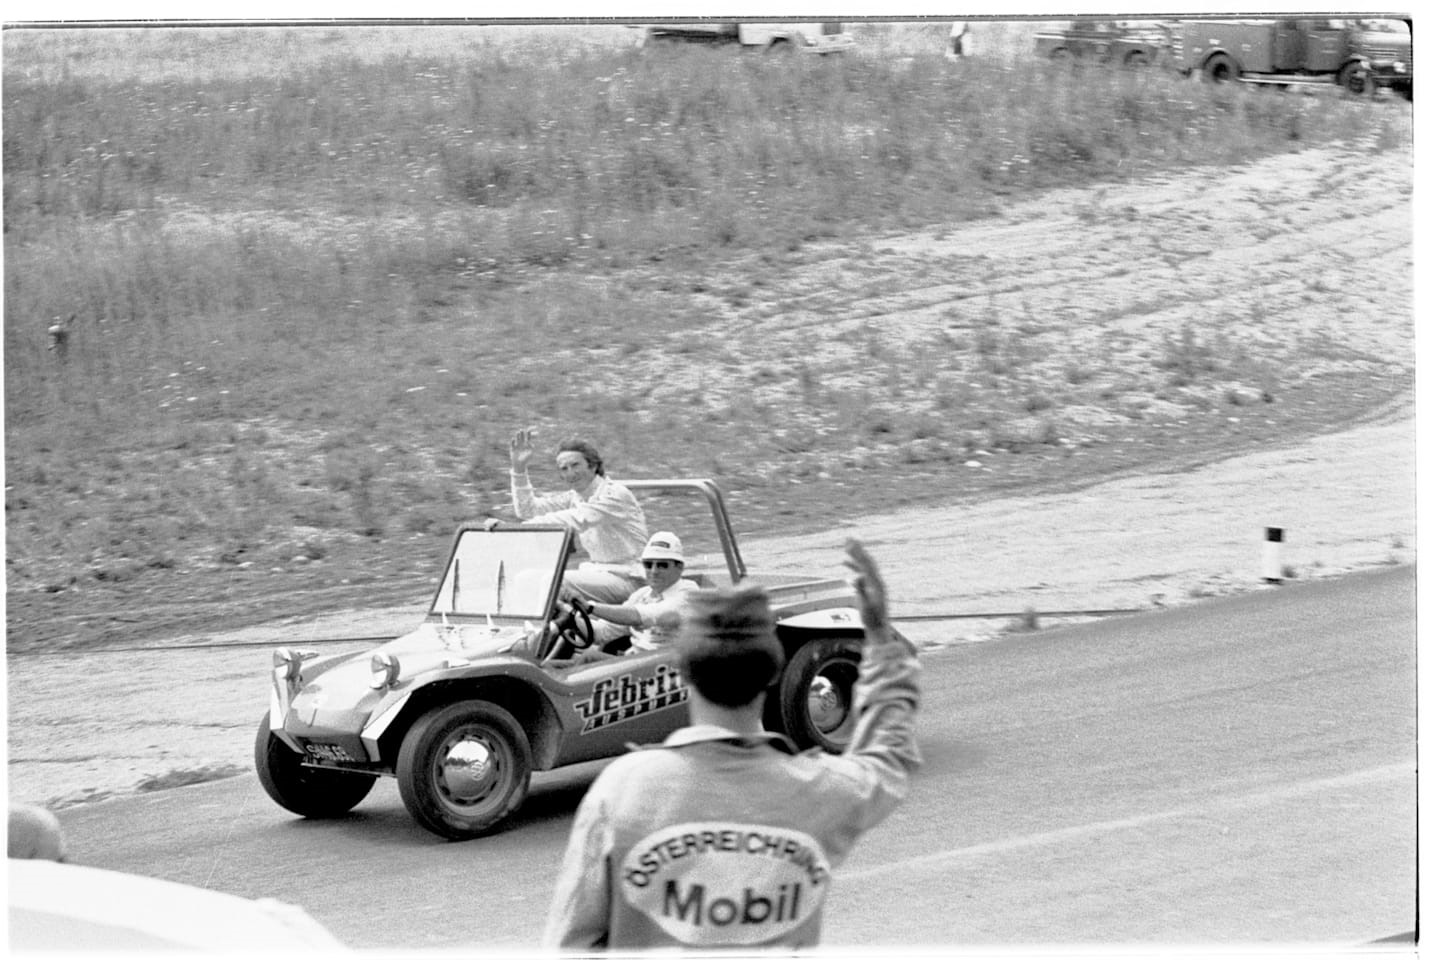 Drivers' parade in a Dune Buggy. 